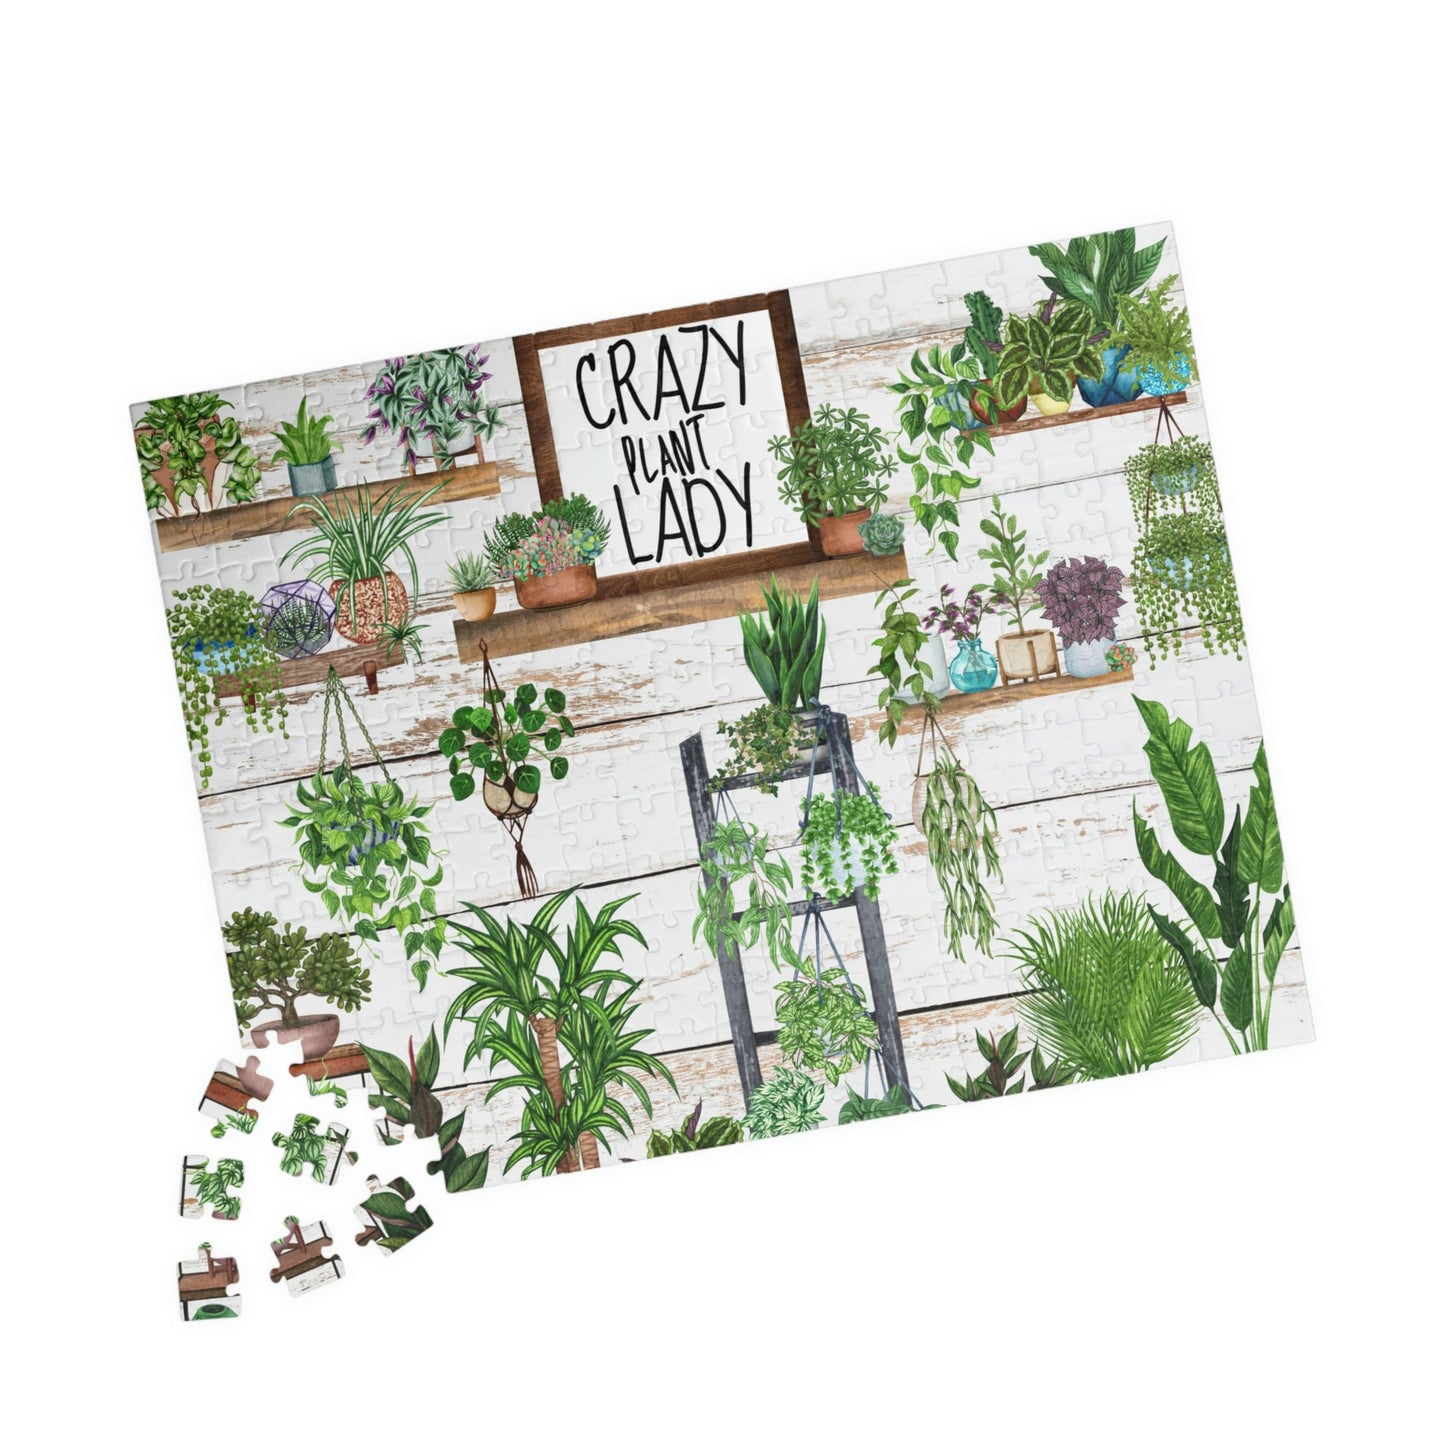 Crazy Plant Lady puzzle - Choice of 3 sizes